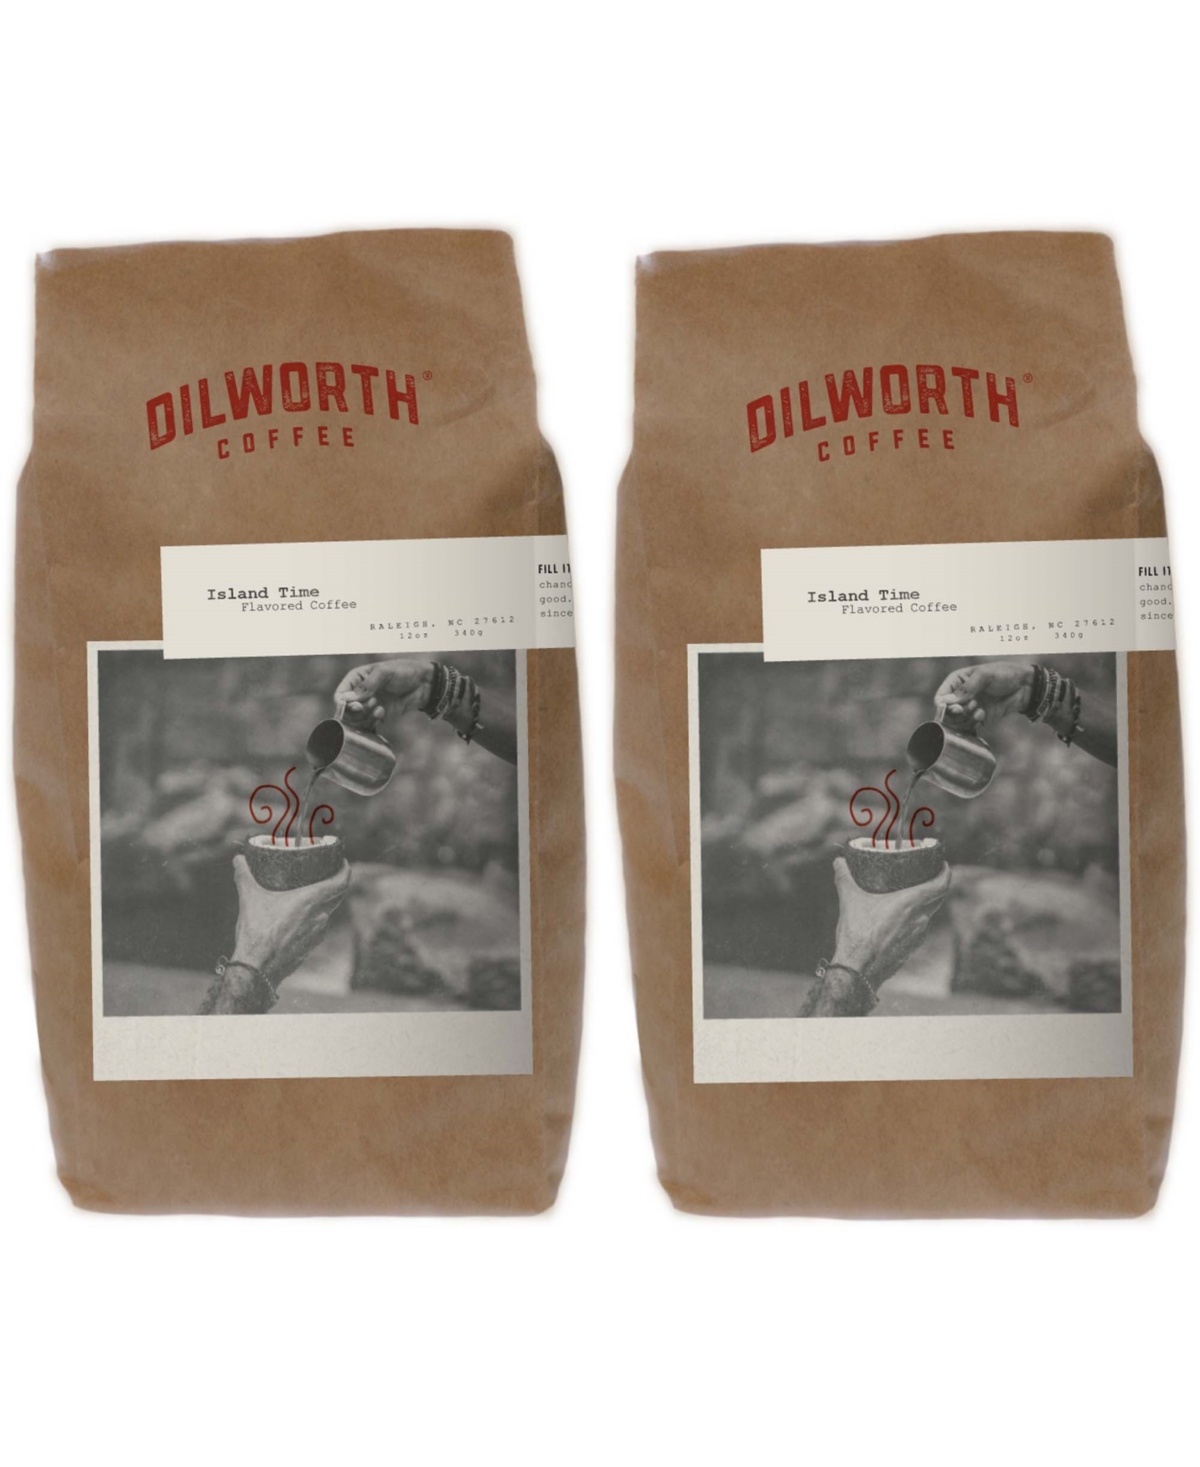 Dilworth Coffee Medium Roast Flavored Ground Coffee In No Color